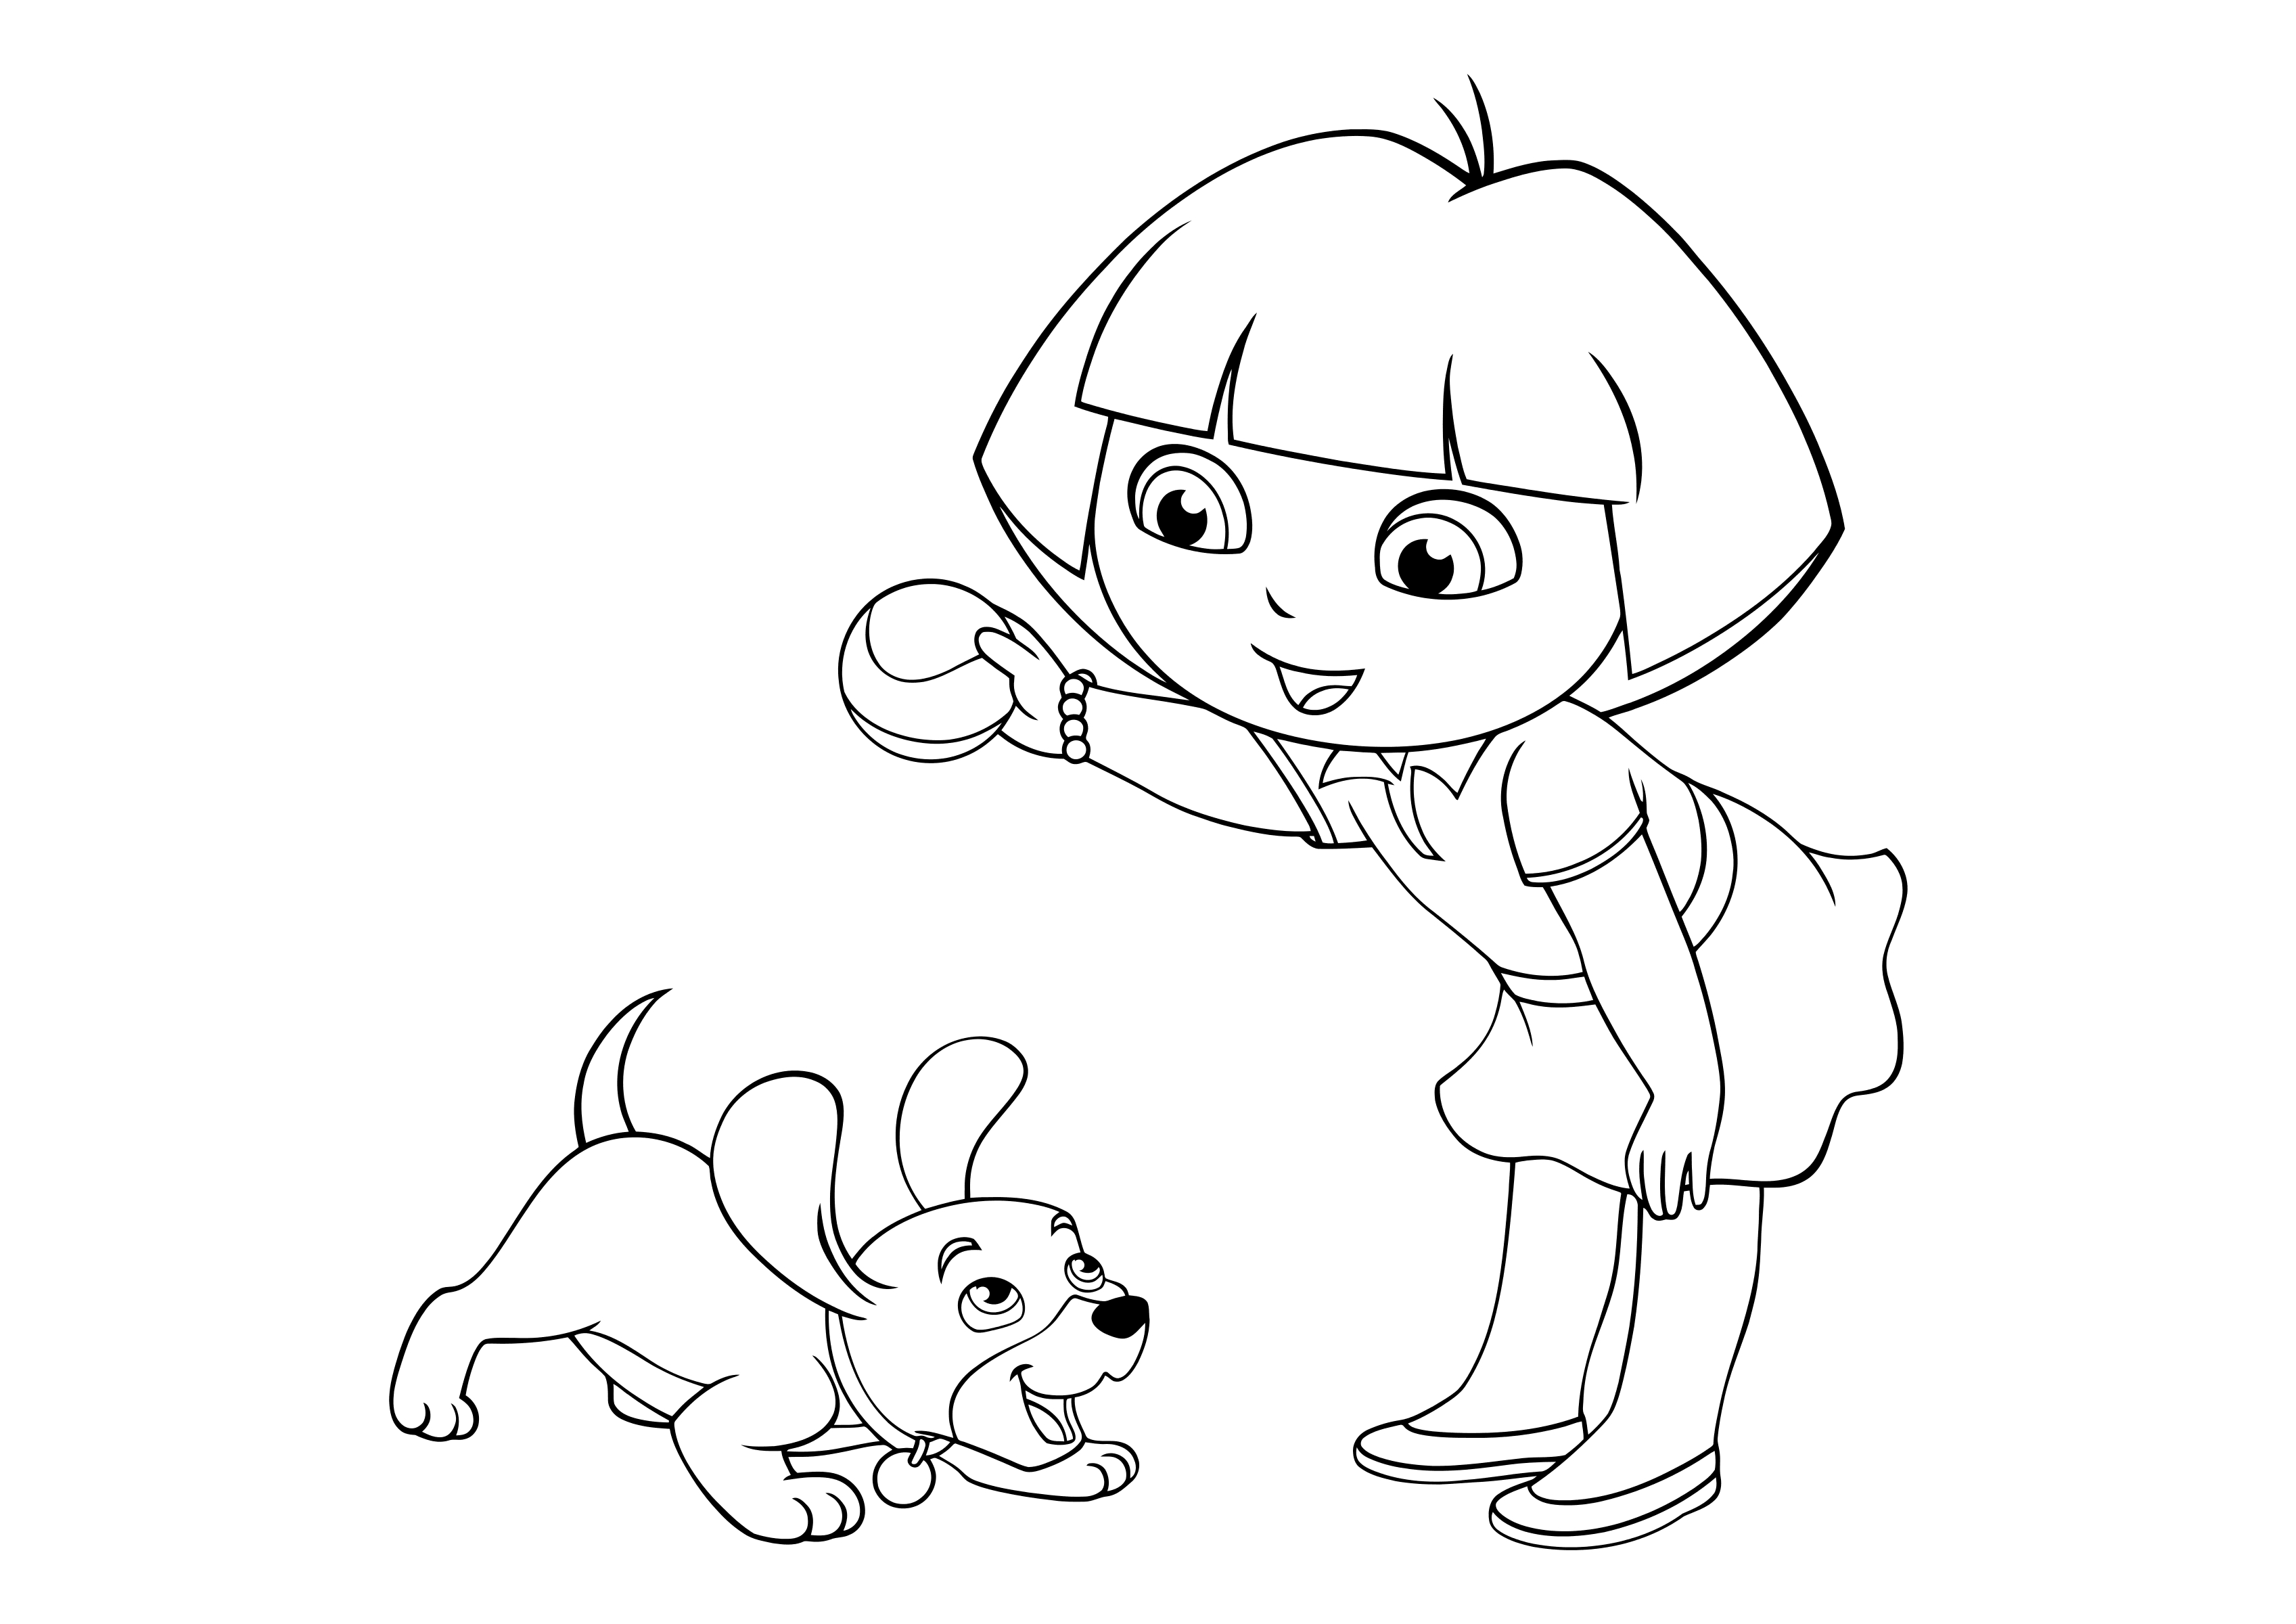 Coloring page Dora the Explorer Dora is playing with a puppy